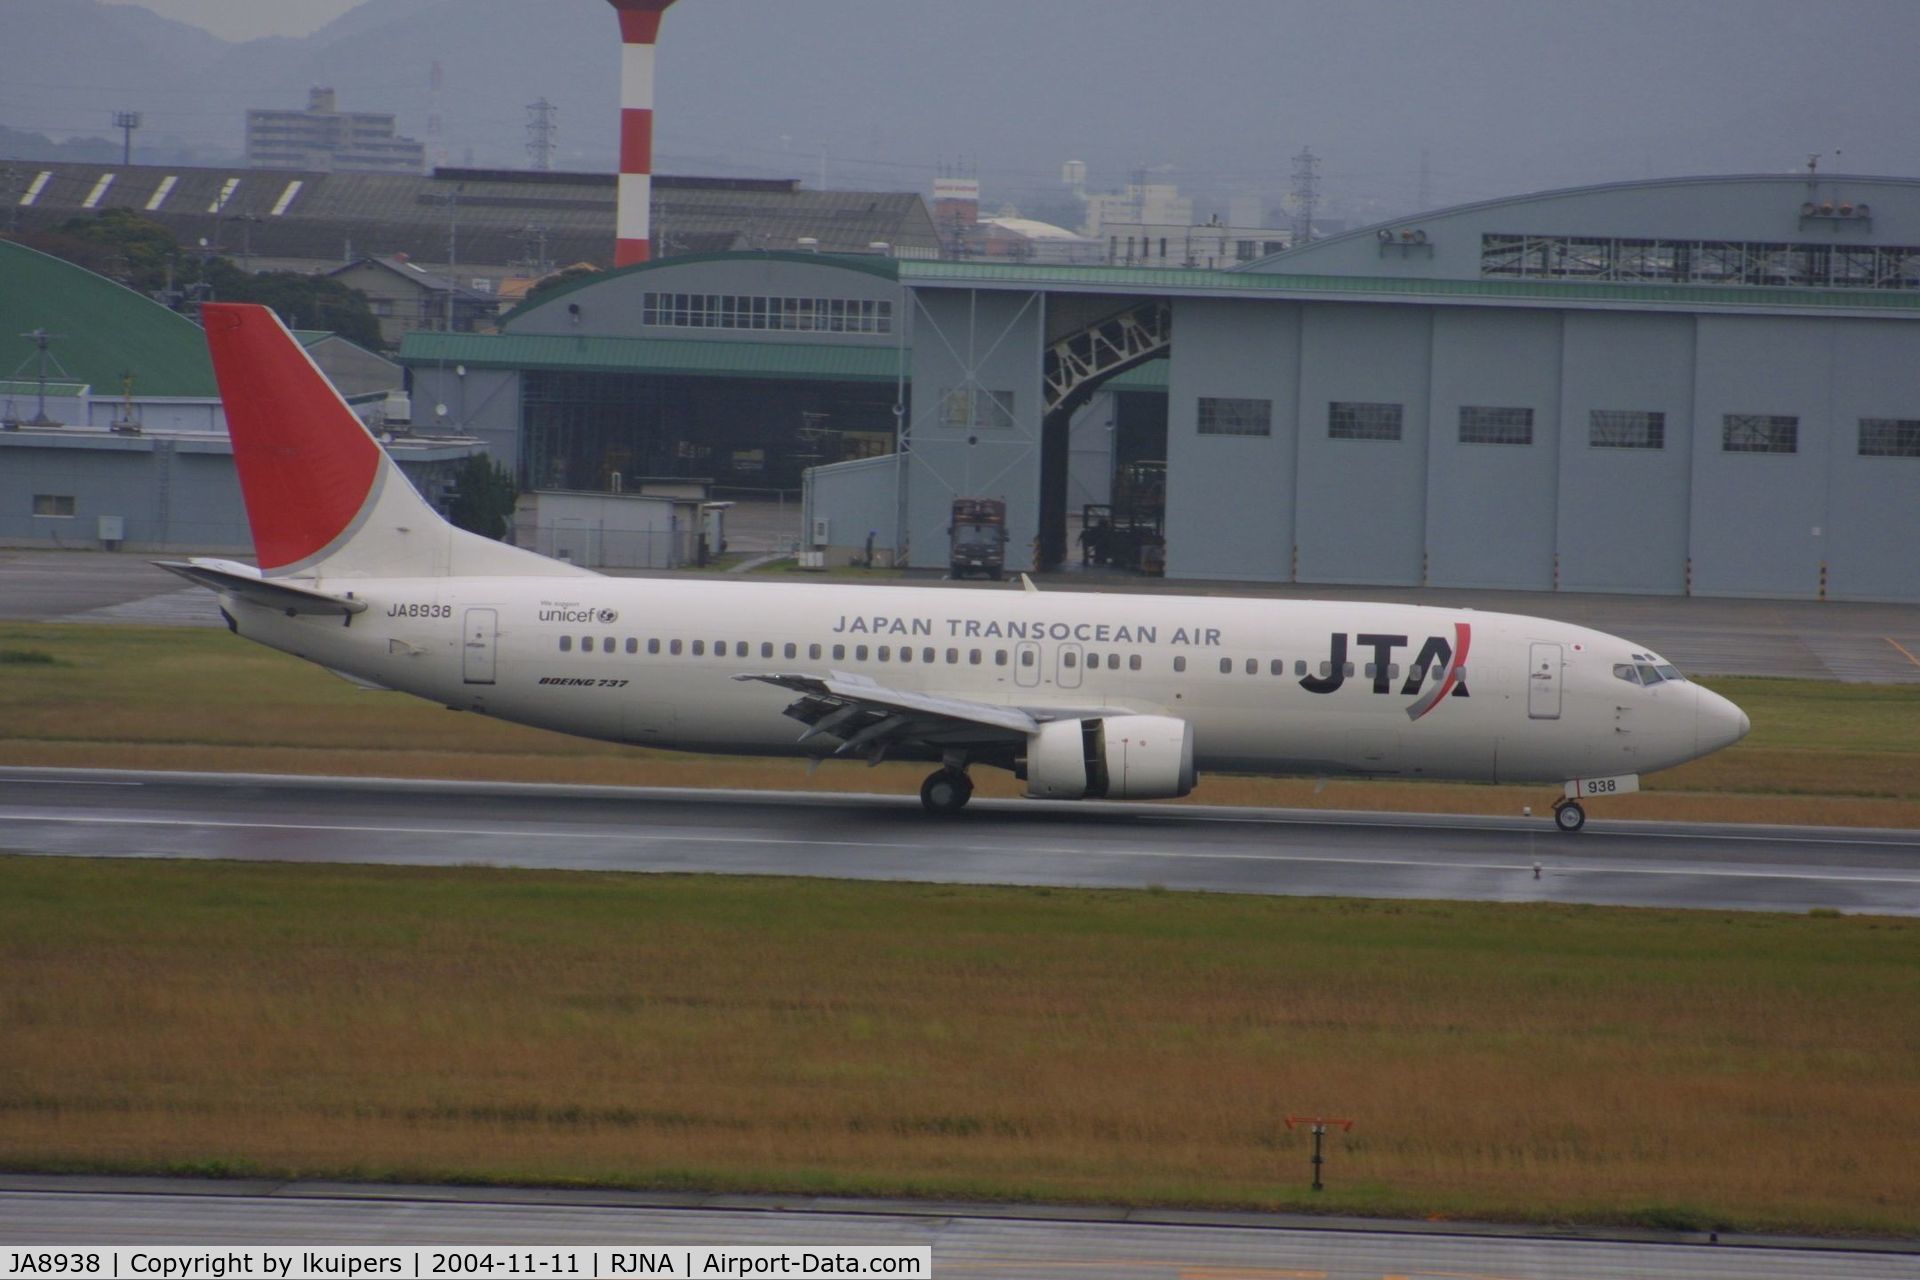 JA8938, 1998 Boeing 737-4Q3 C/N 29485, Another JAL subsdiary is Japan Transocean Air, here at Nagoya